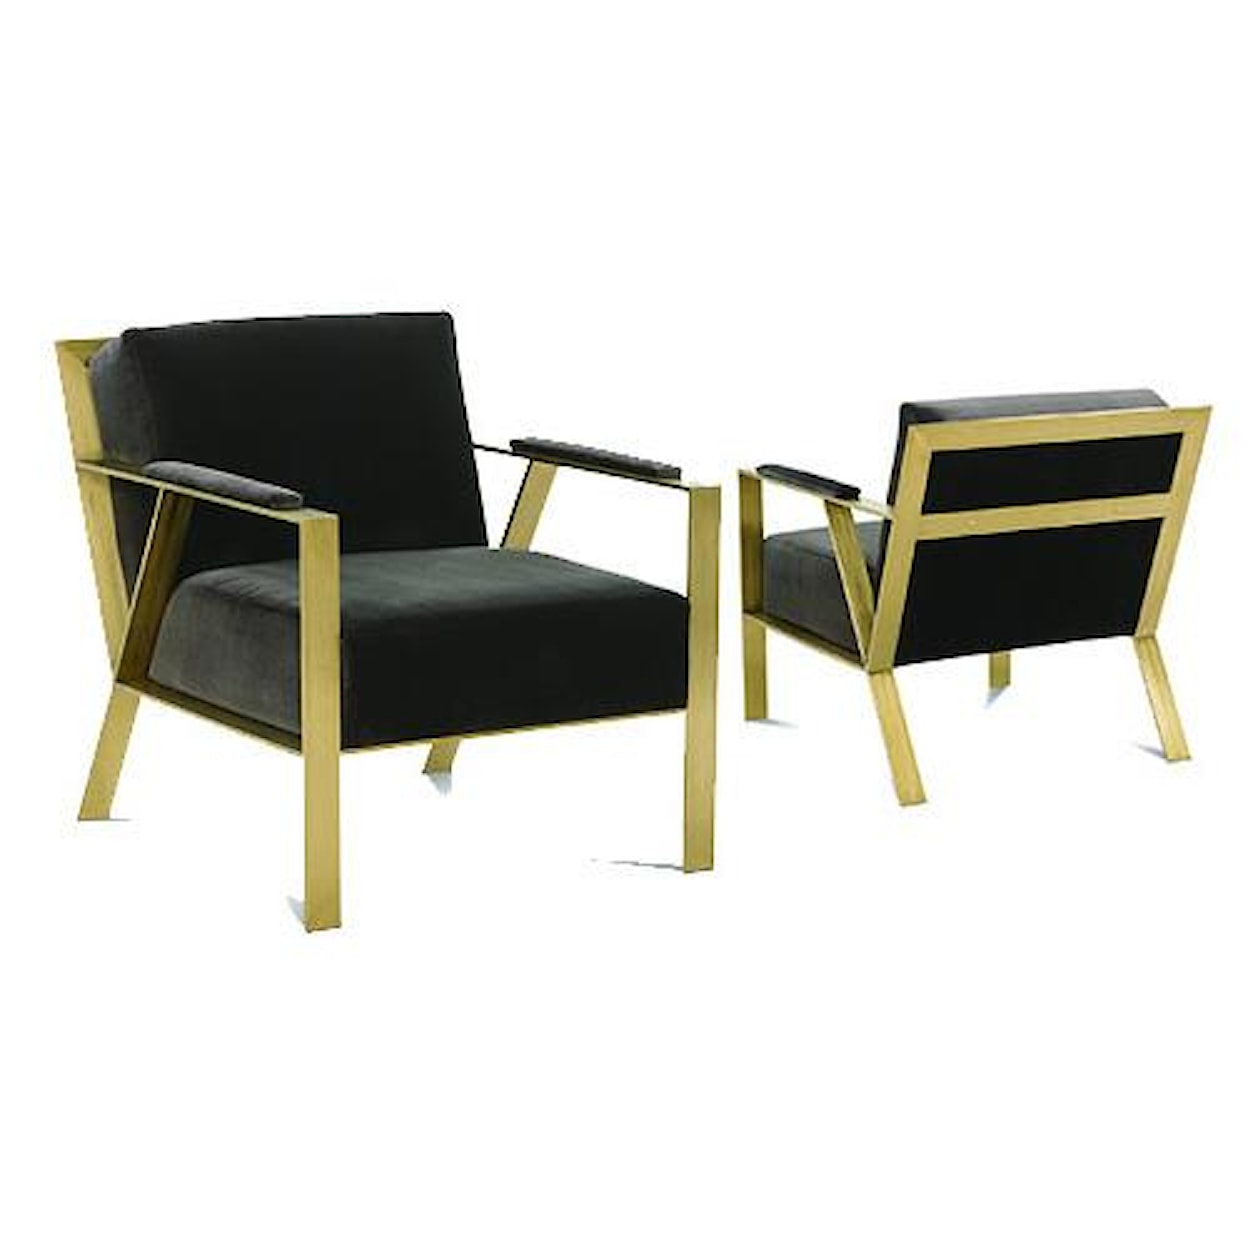 Rowe Chairs and Accents Bergen Chair